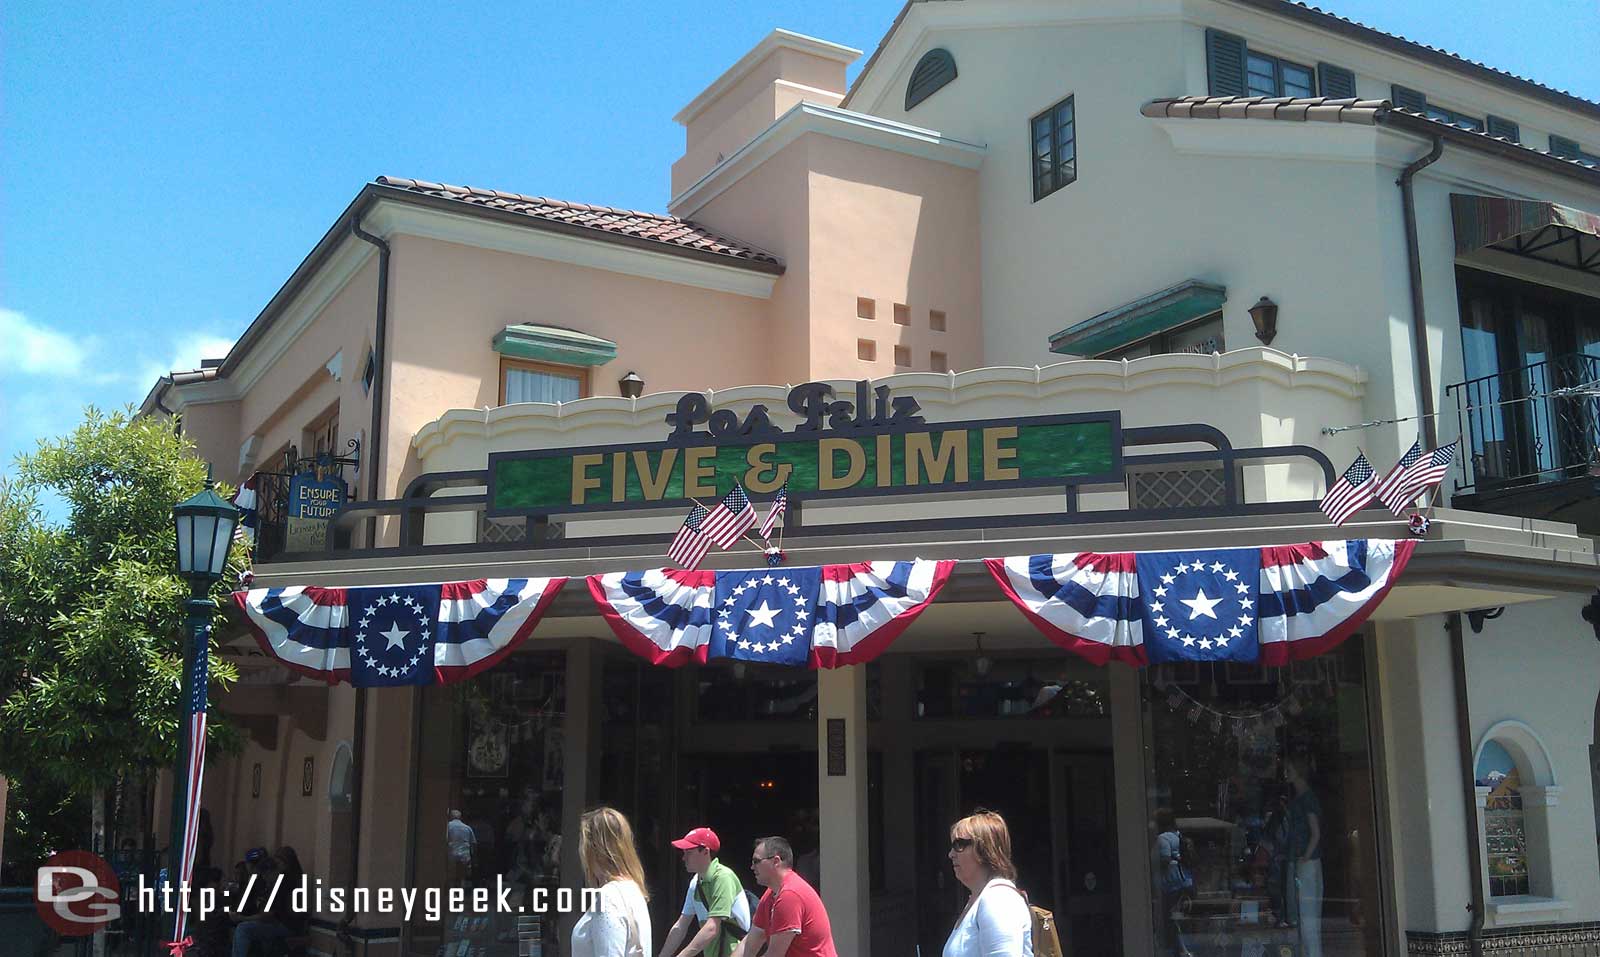 Just arrived at the Disneyland Resort for the festivities. BuenaVistaStreet decked out for Memorial Day